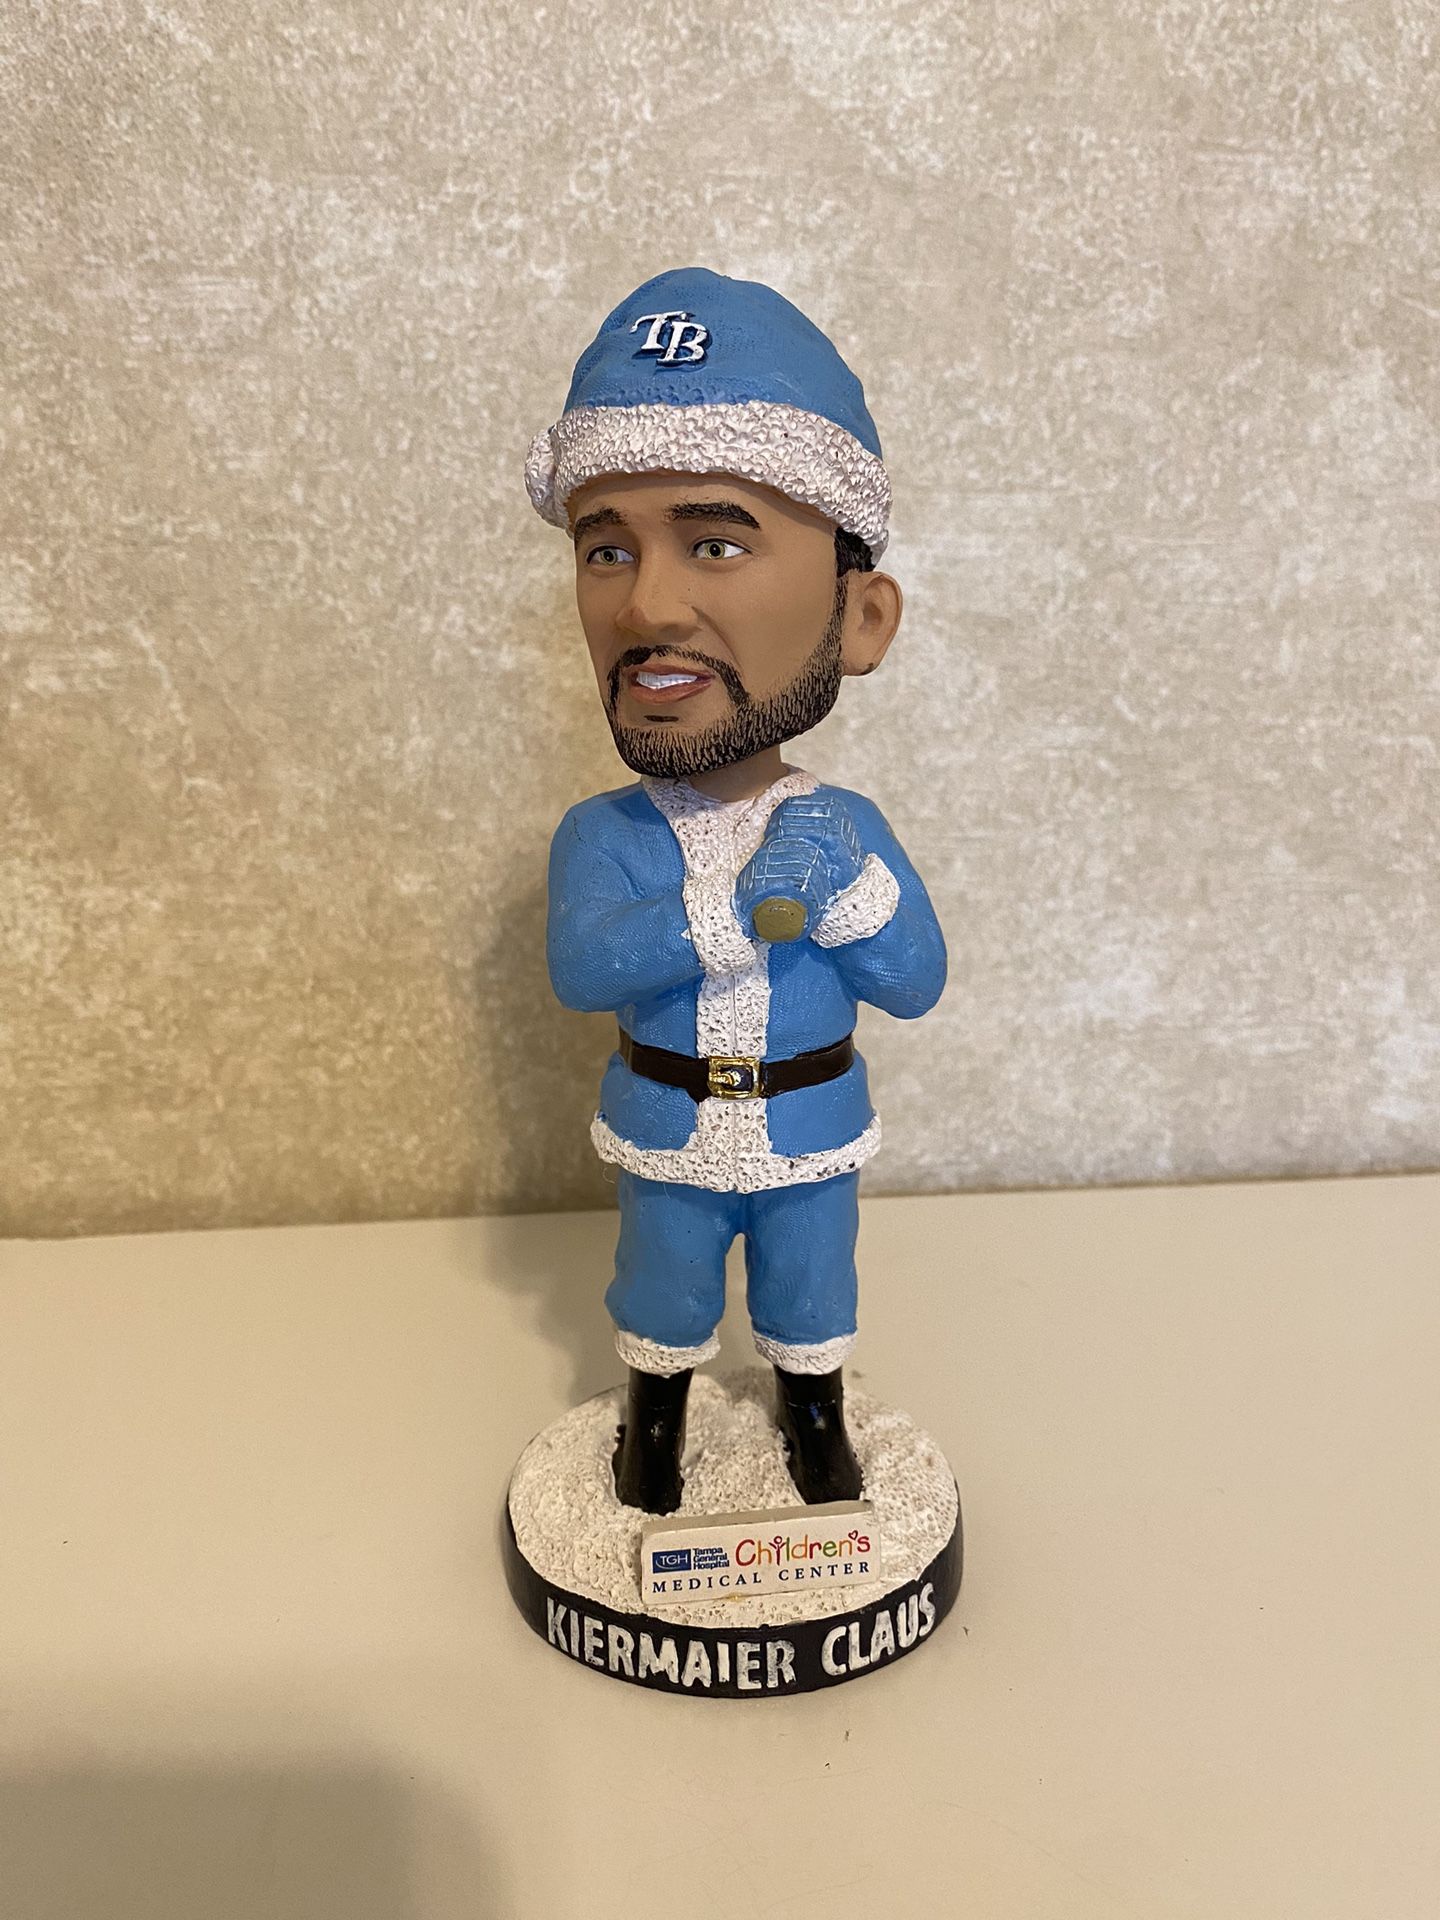 Kevin Kiermaier Claus Bobblehead Merry Christmas In July Tampa Bay Rays Baseball